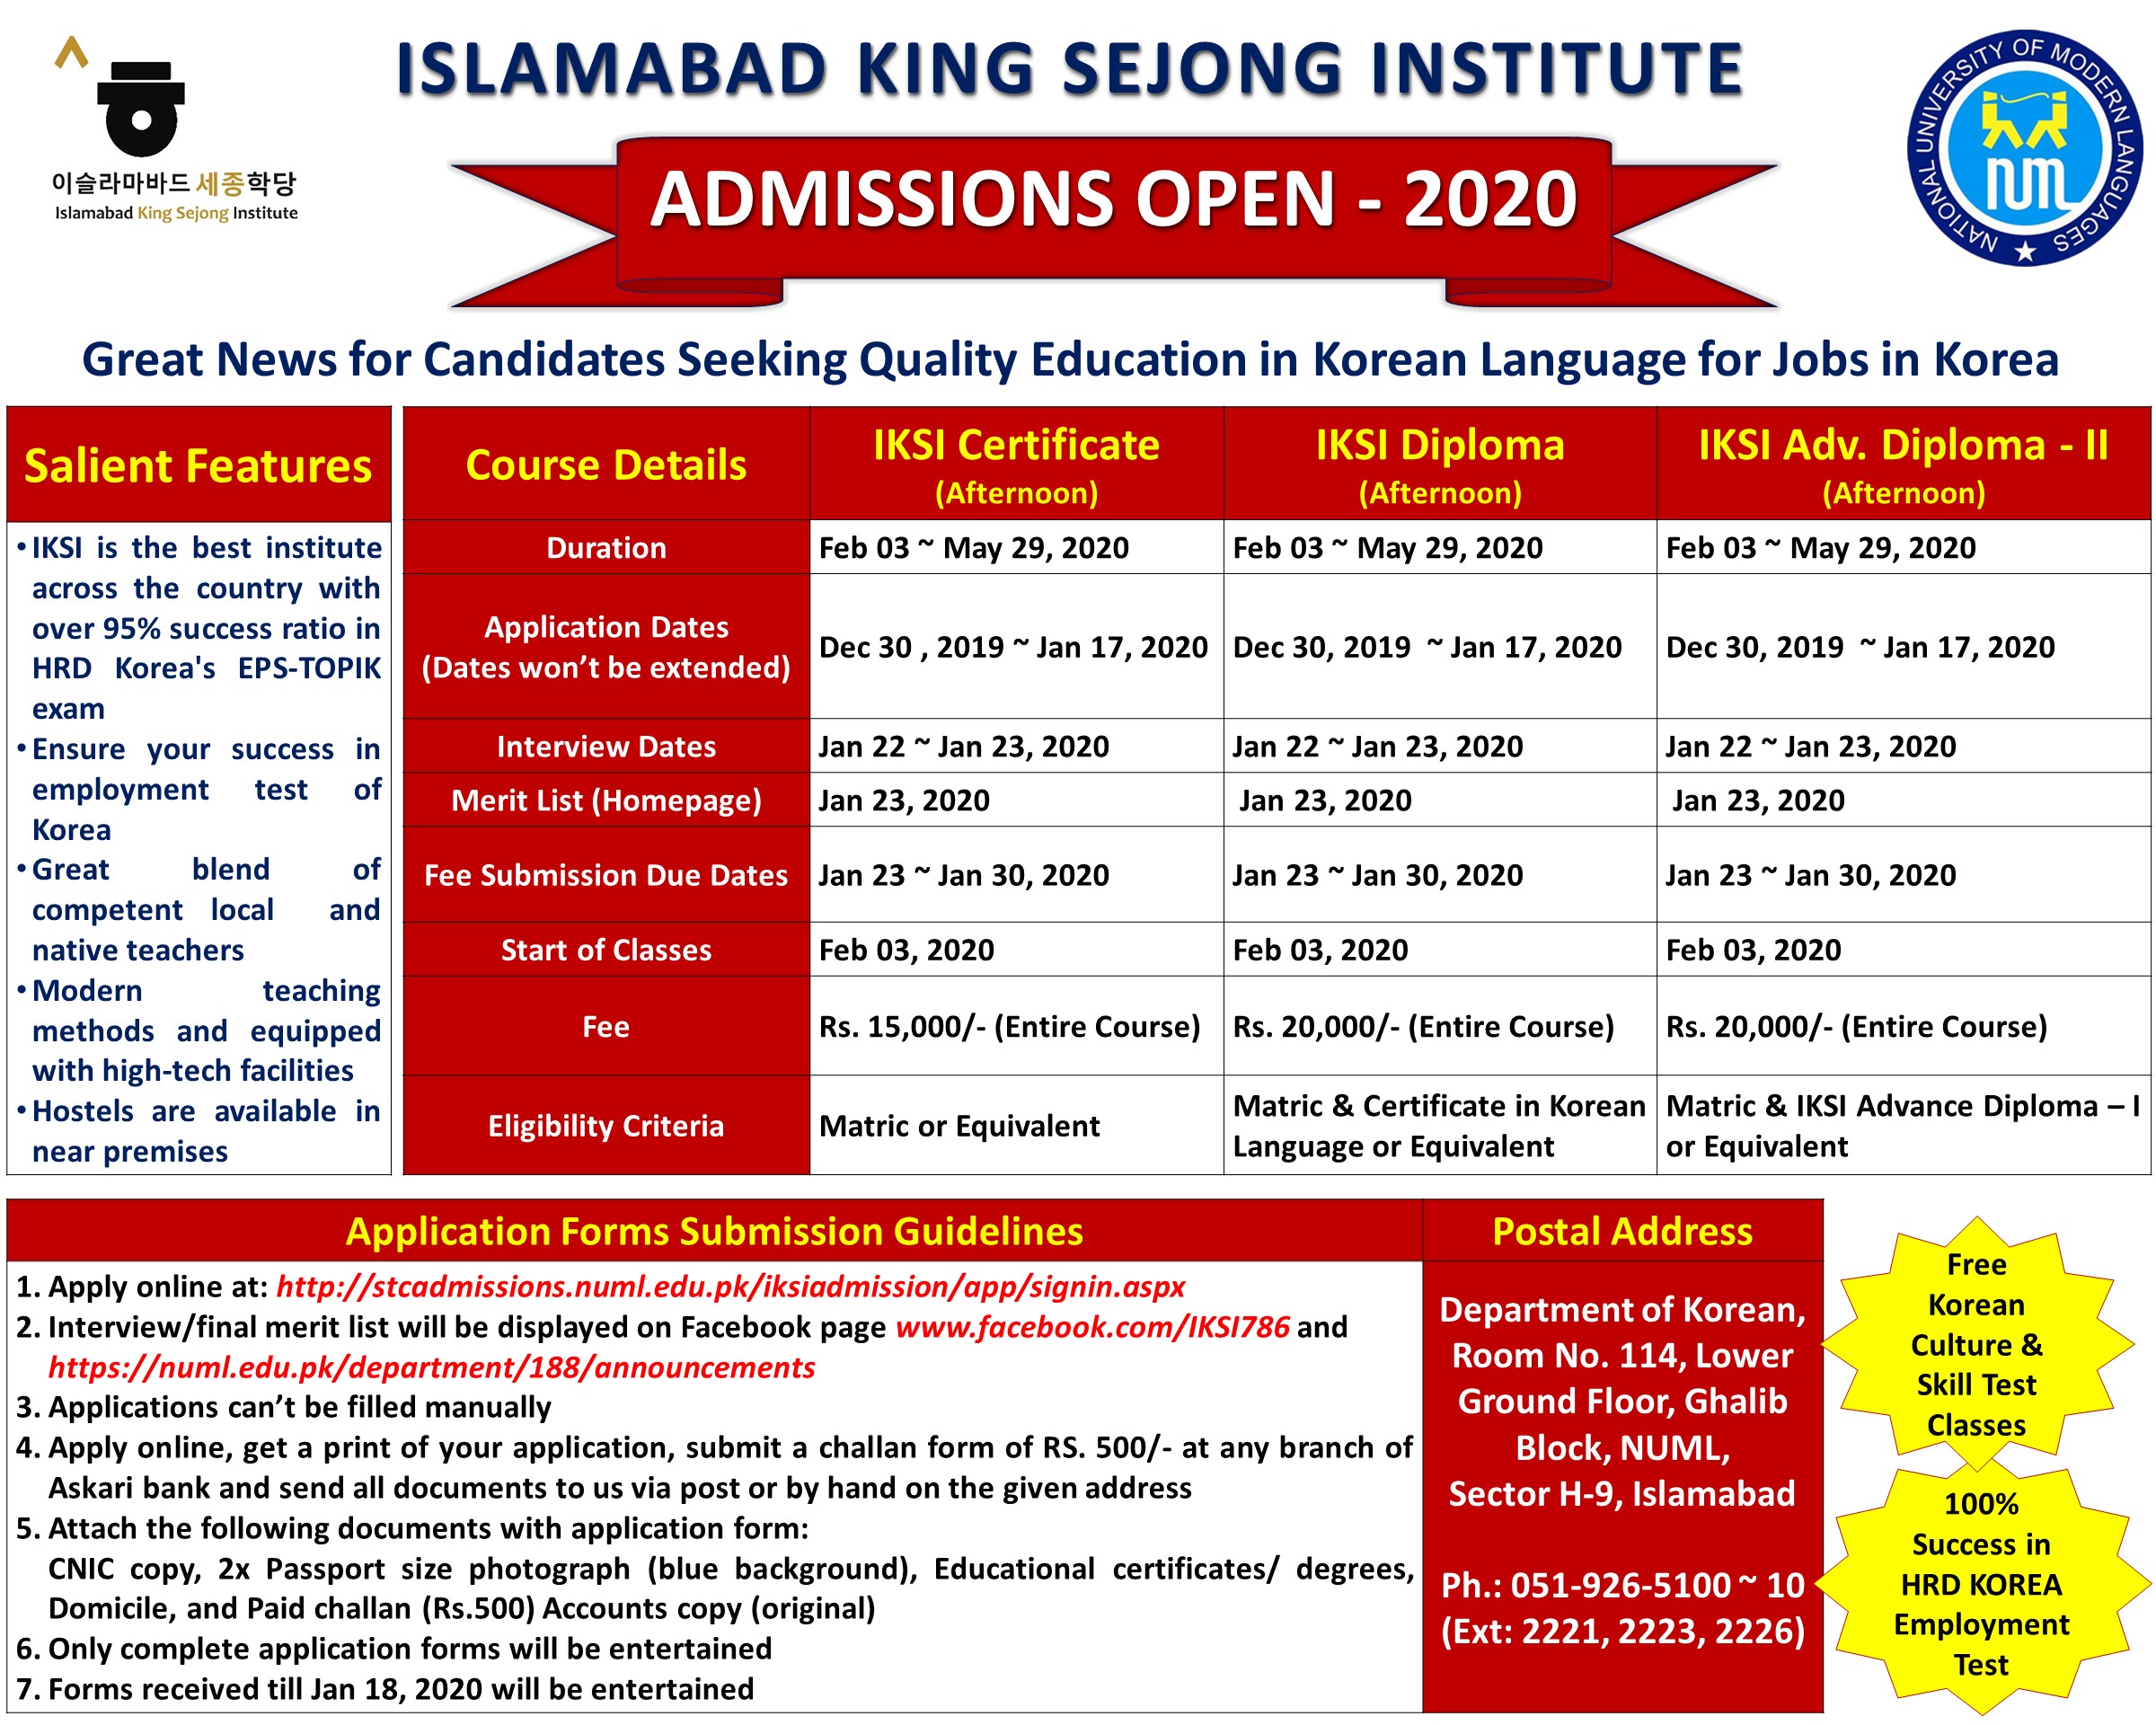 ISLAMABAD KING SEJONG INSTITUTE ADMISSIONS OPEN